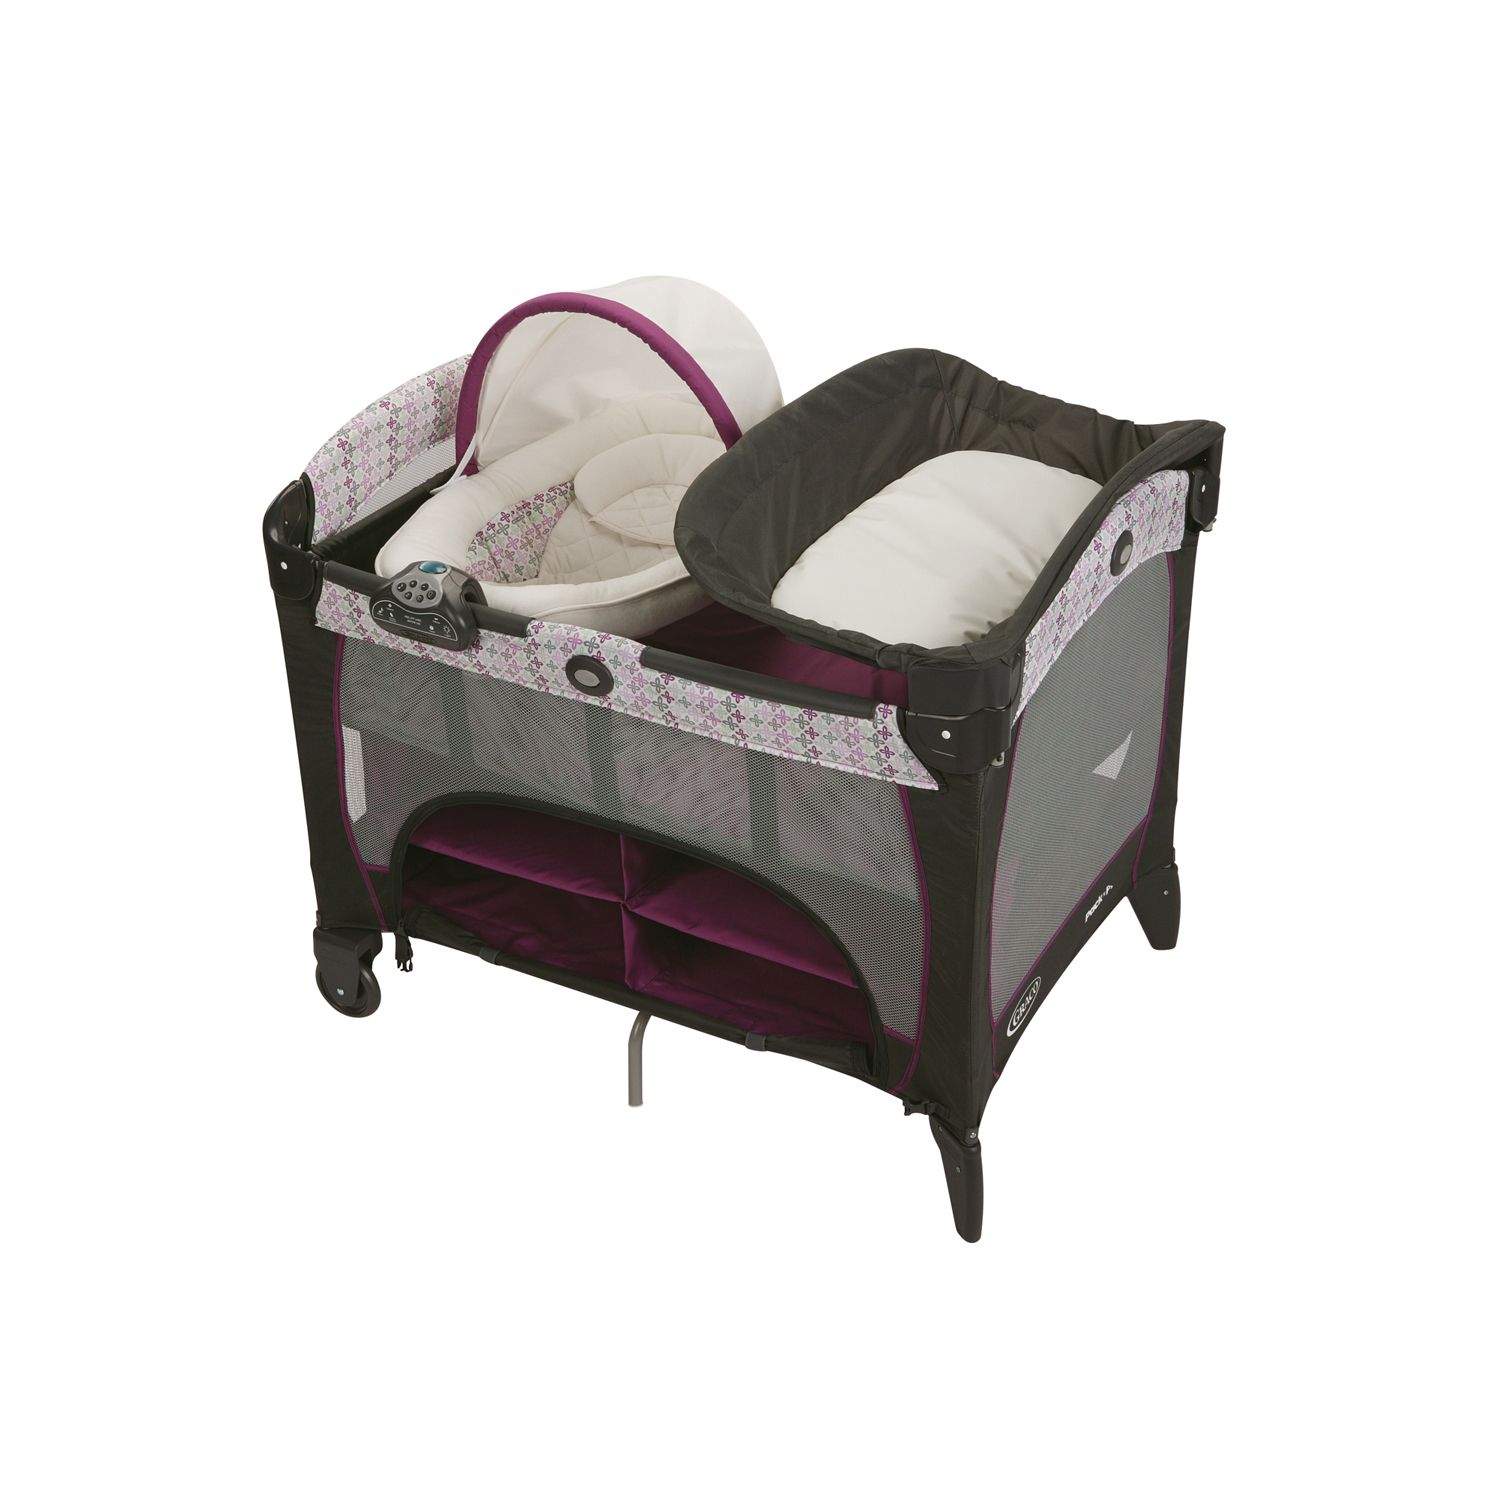 graco pack n play napper safe for sleeping